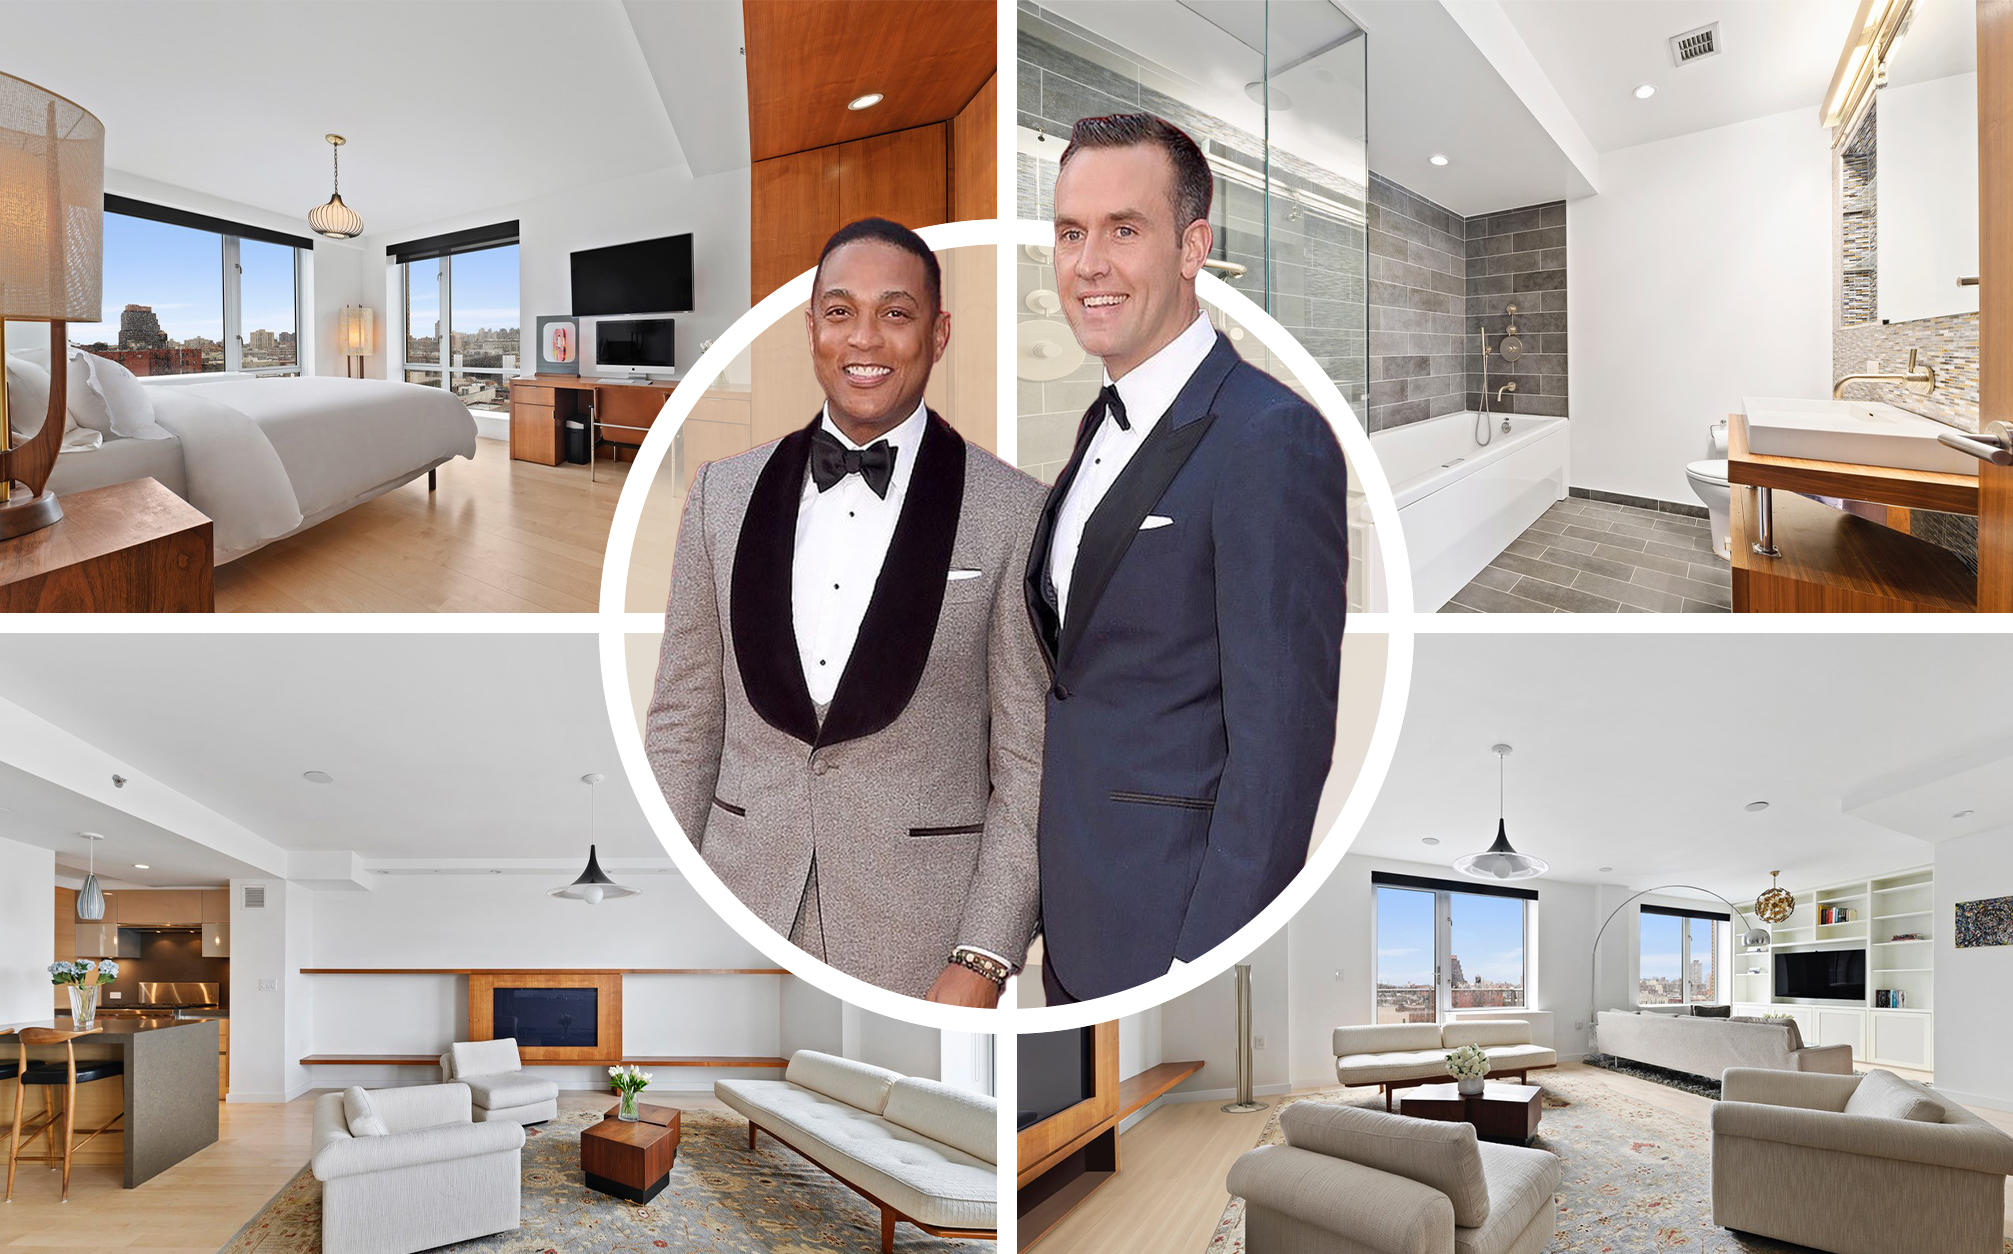 Don Lemon and Tim Malone with their apartment at 2280 Frederick Douglass Boulevard